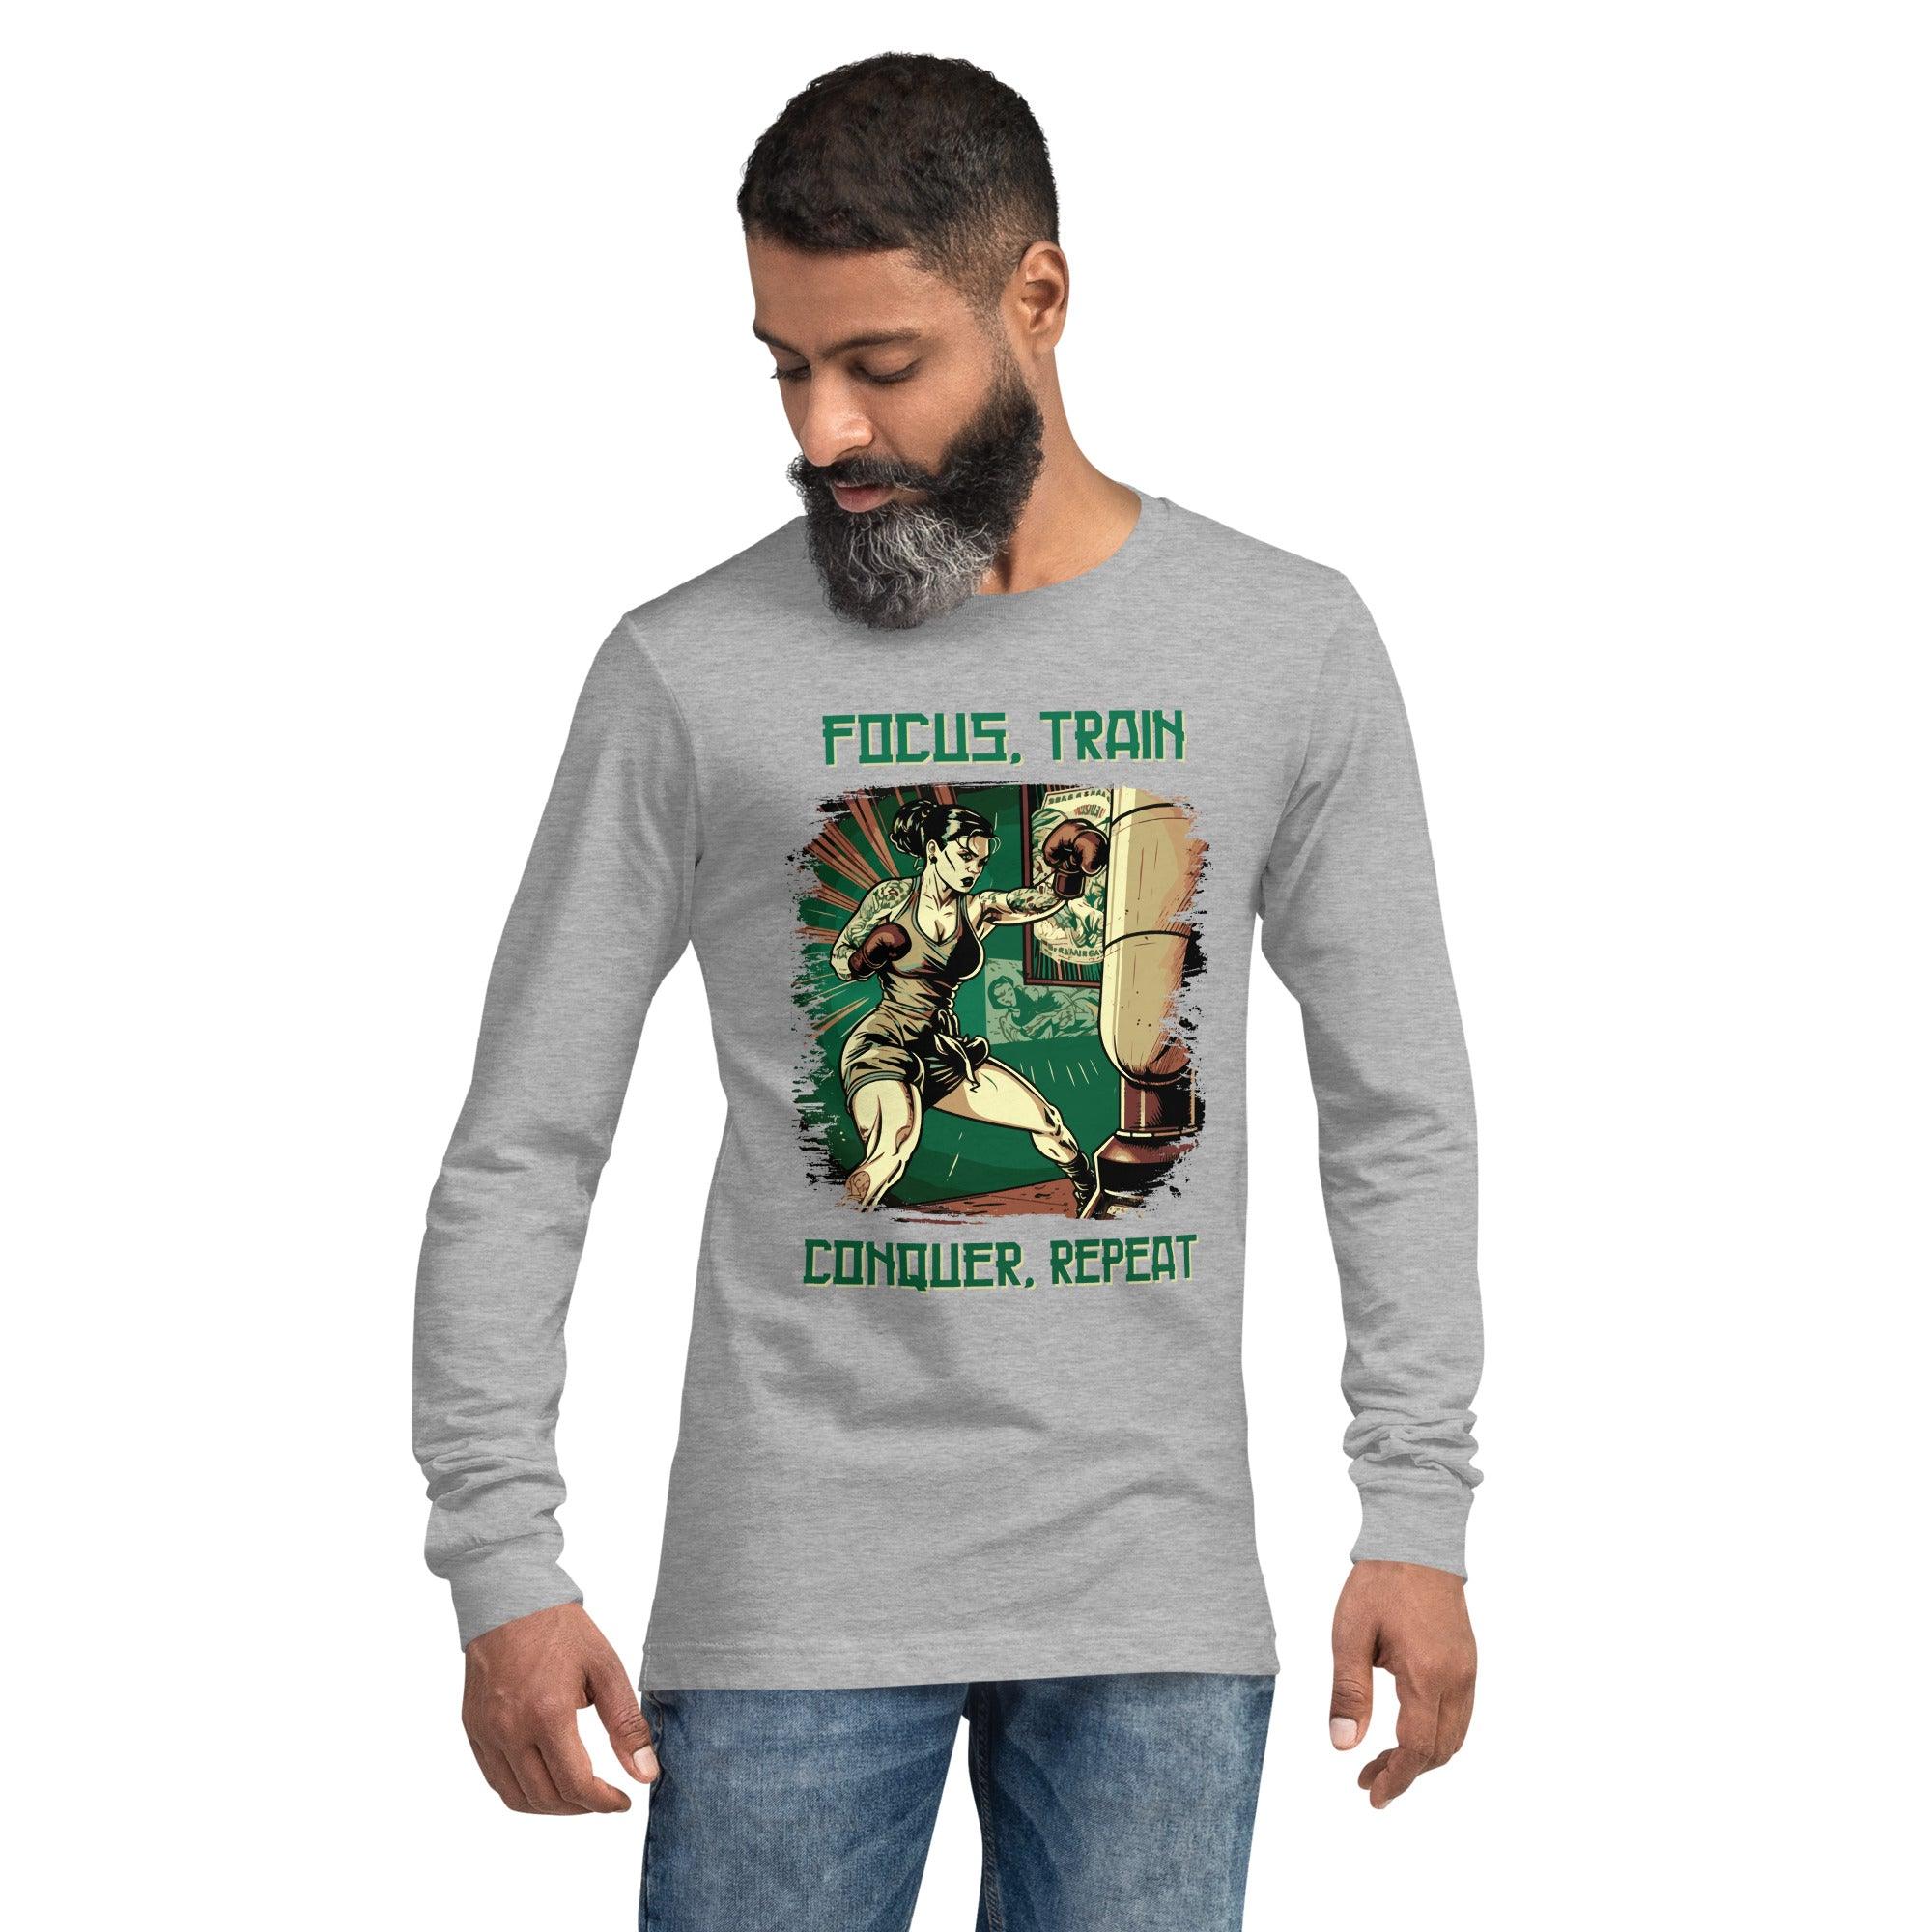 Focus Train Conquer Repeat Unisex Long Sleeve Tee - Beyond T-shirts